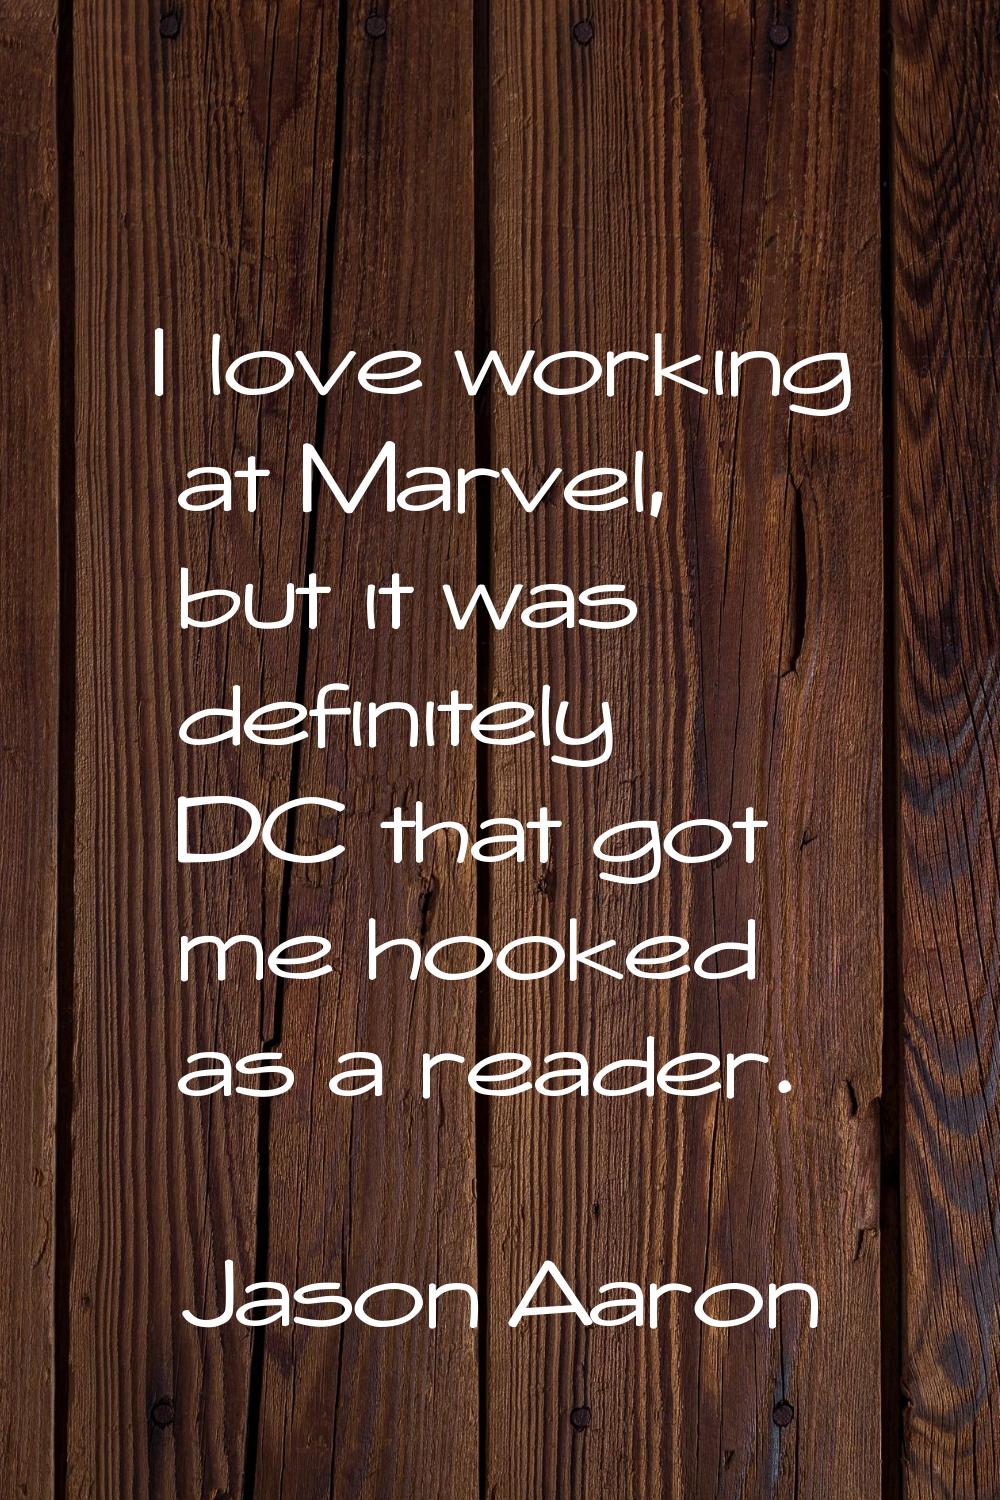 I love working at Marvel, but it was definitely DC that got me hooked as a reader.